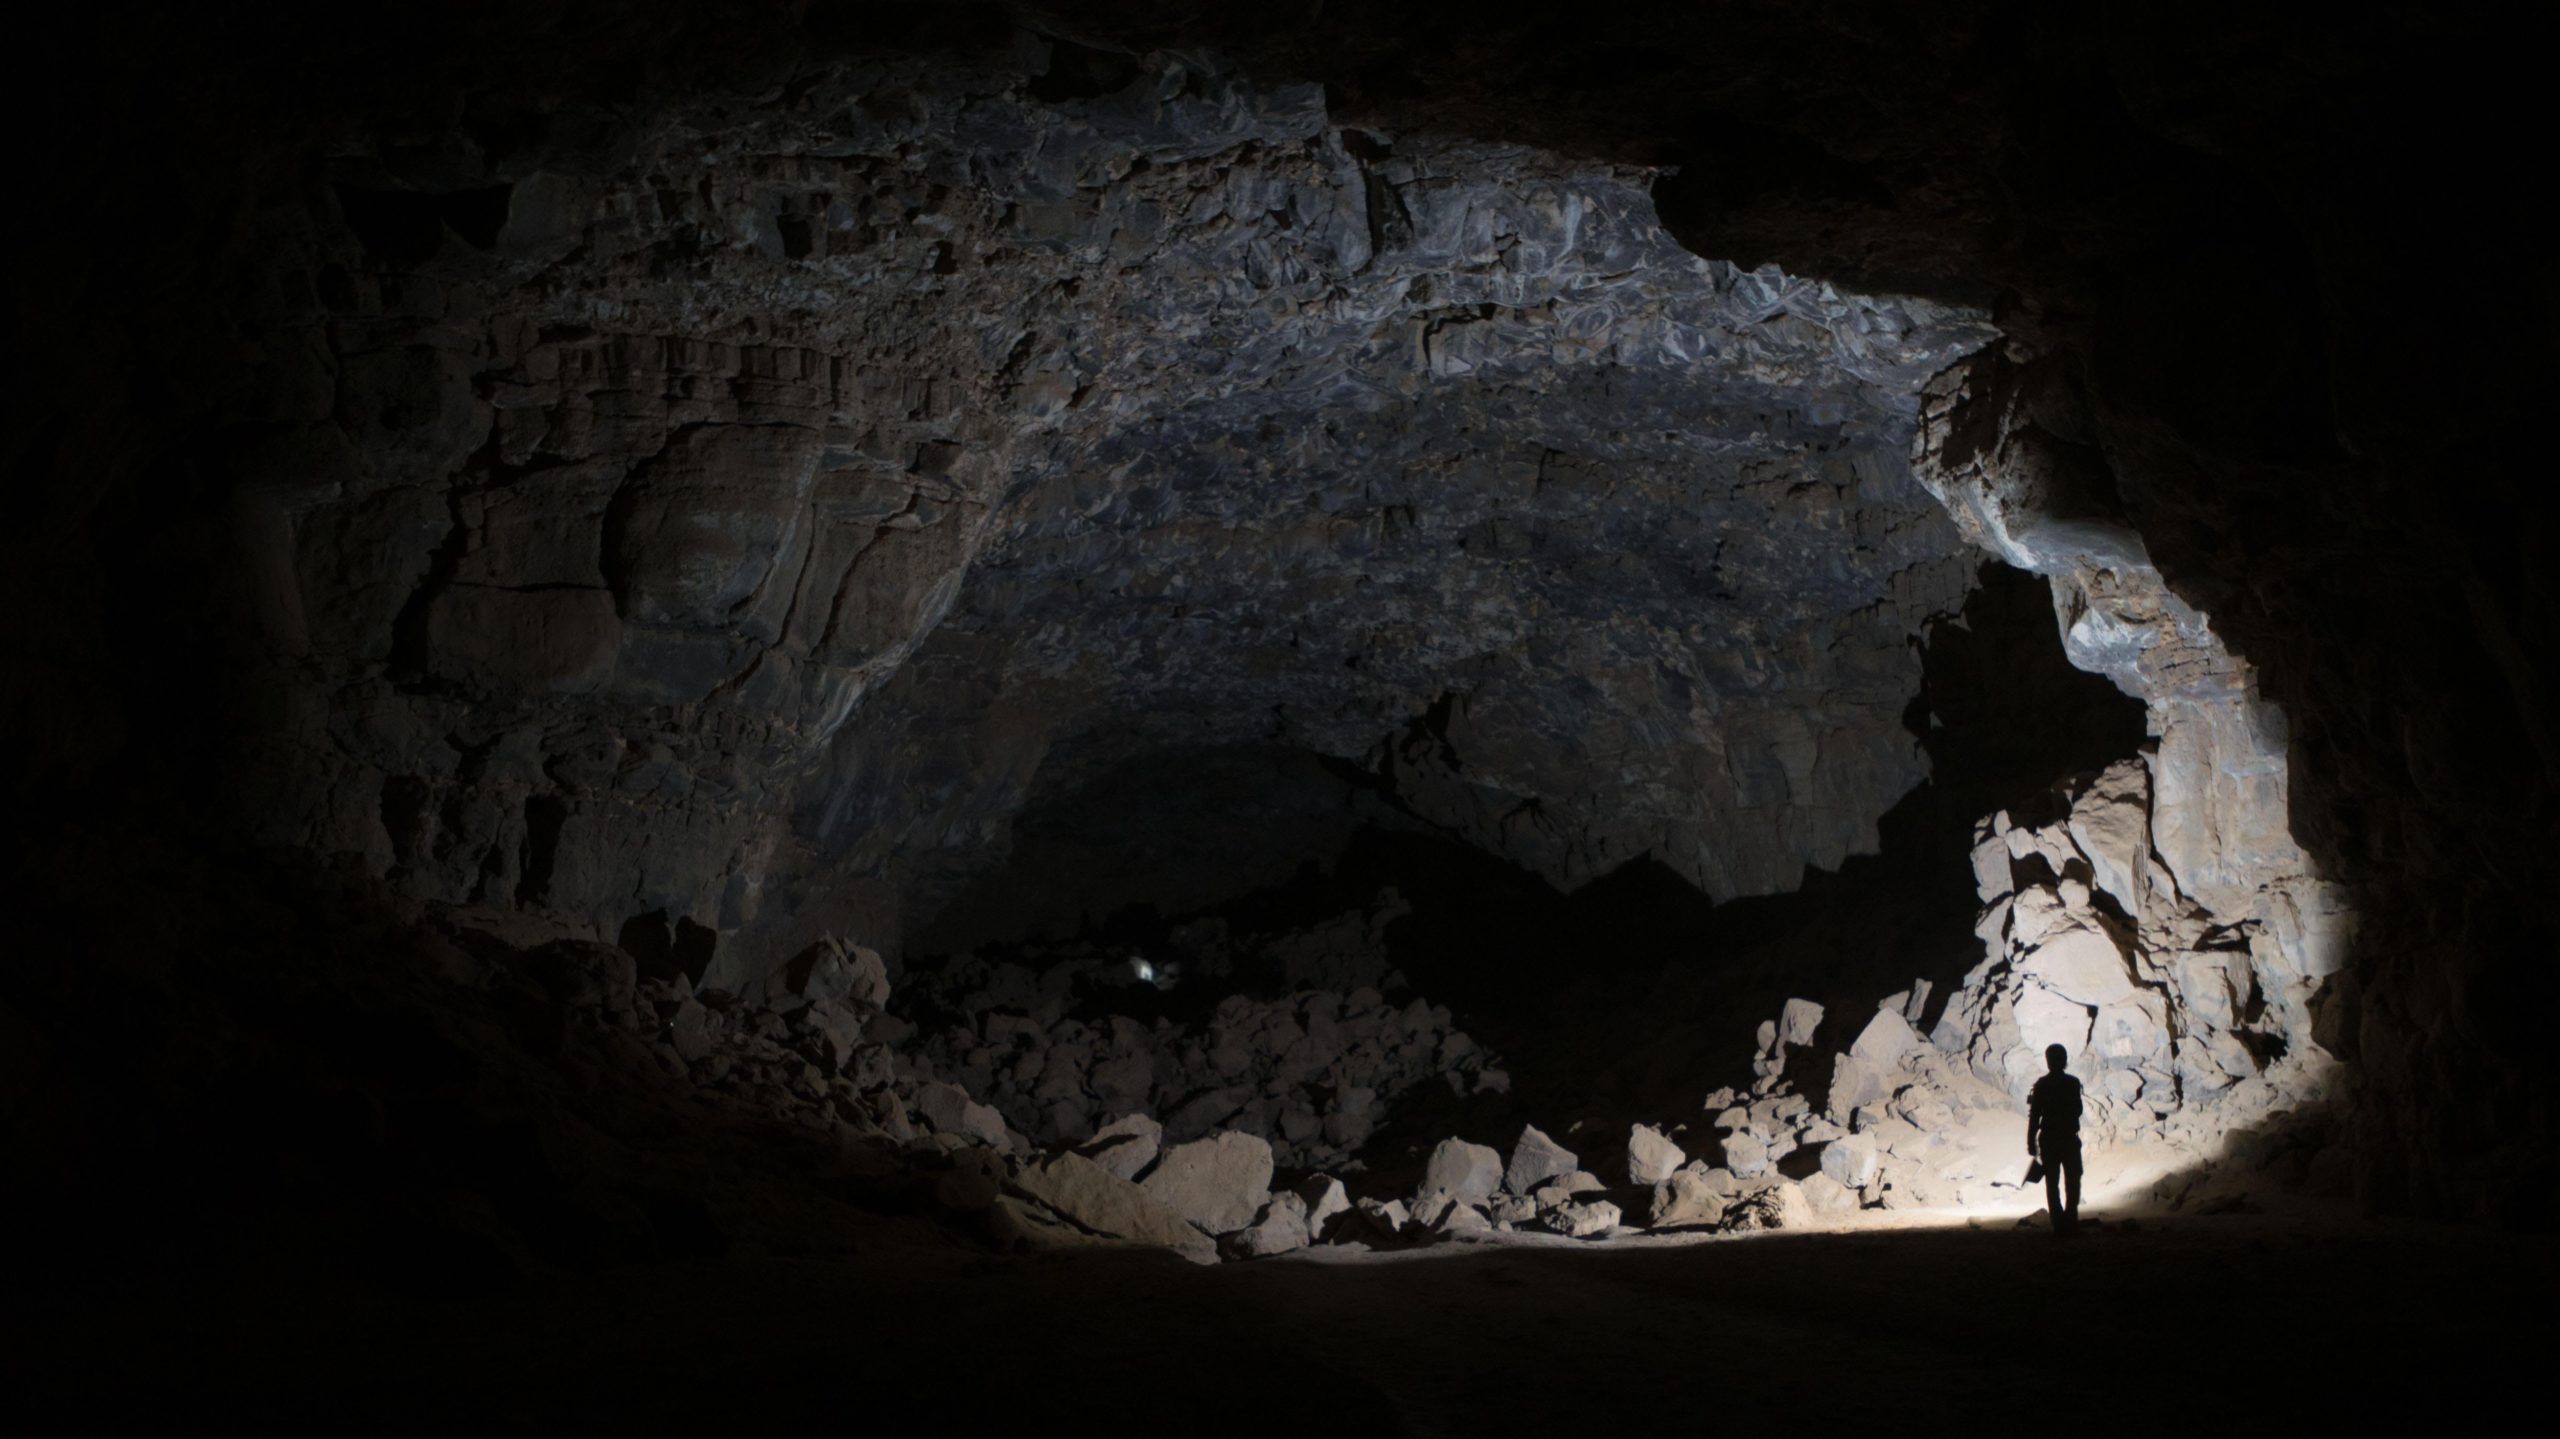 The a cavernous opening in the Umm Jirsan lava tube, illuminated by a researcher's light. (Image: THE PALAEODESERTS PROJECT)